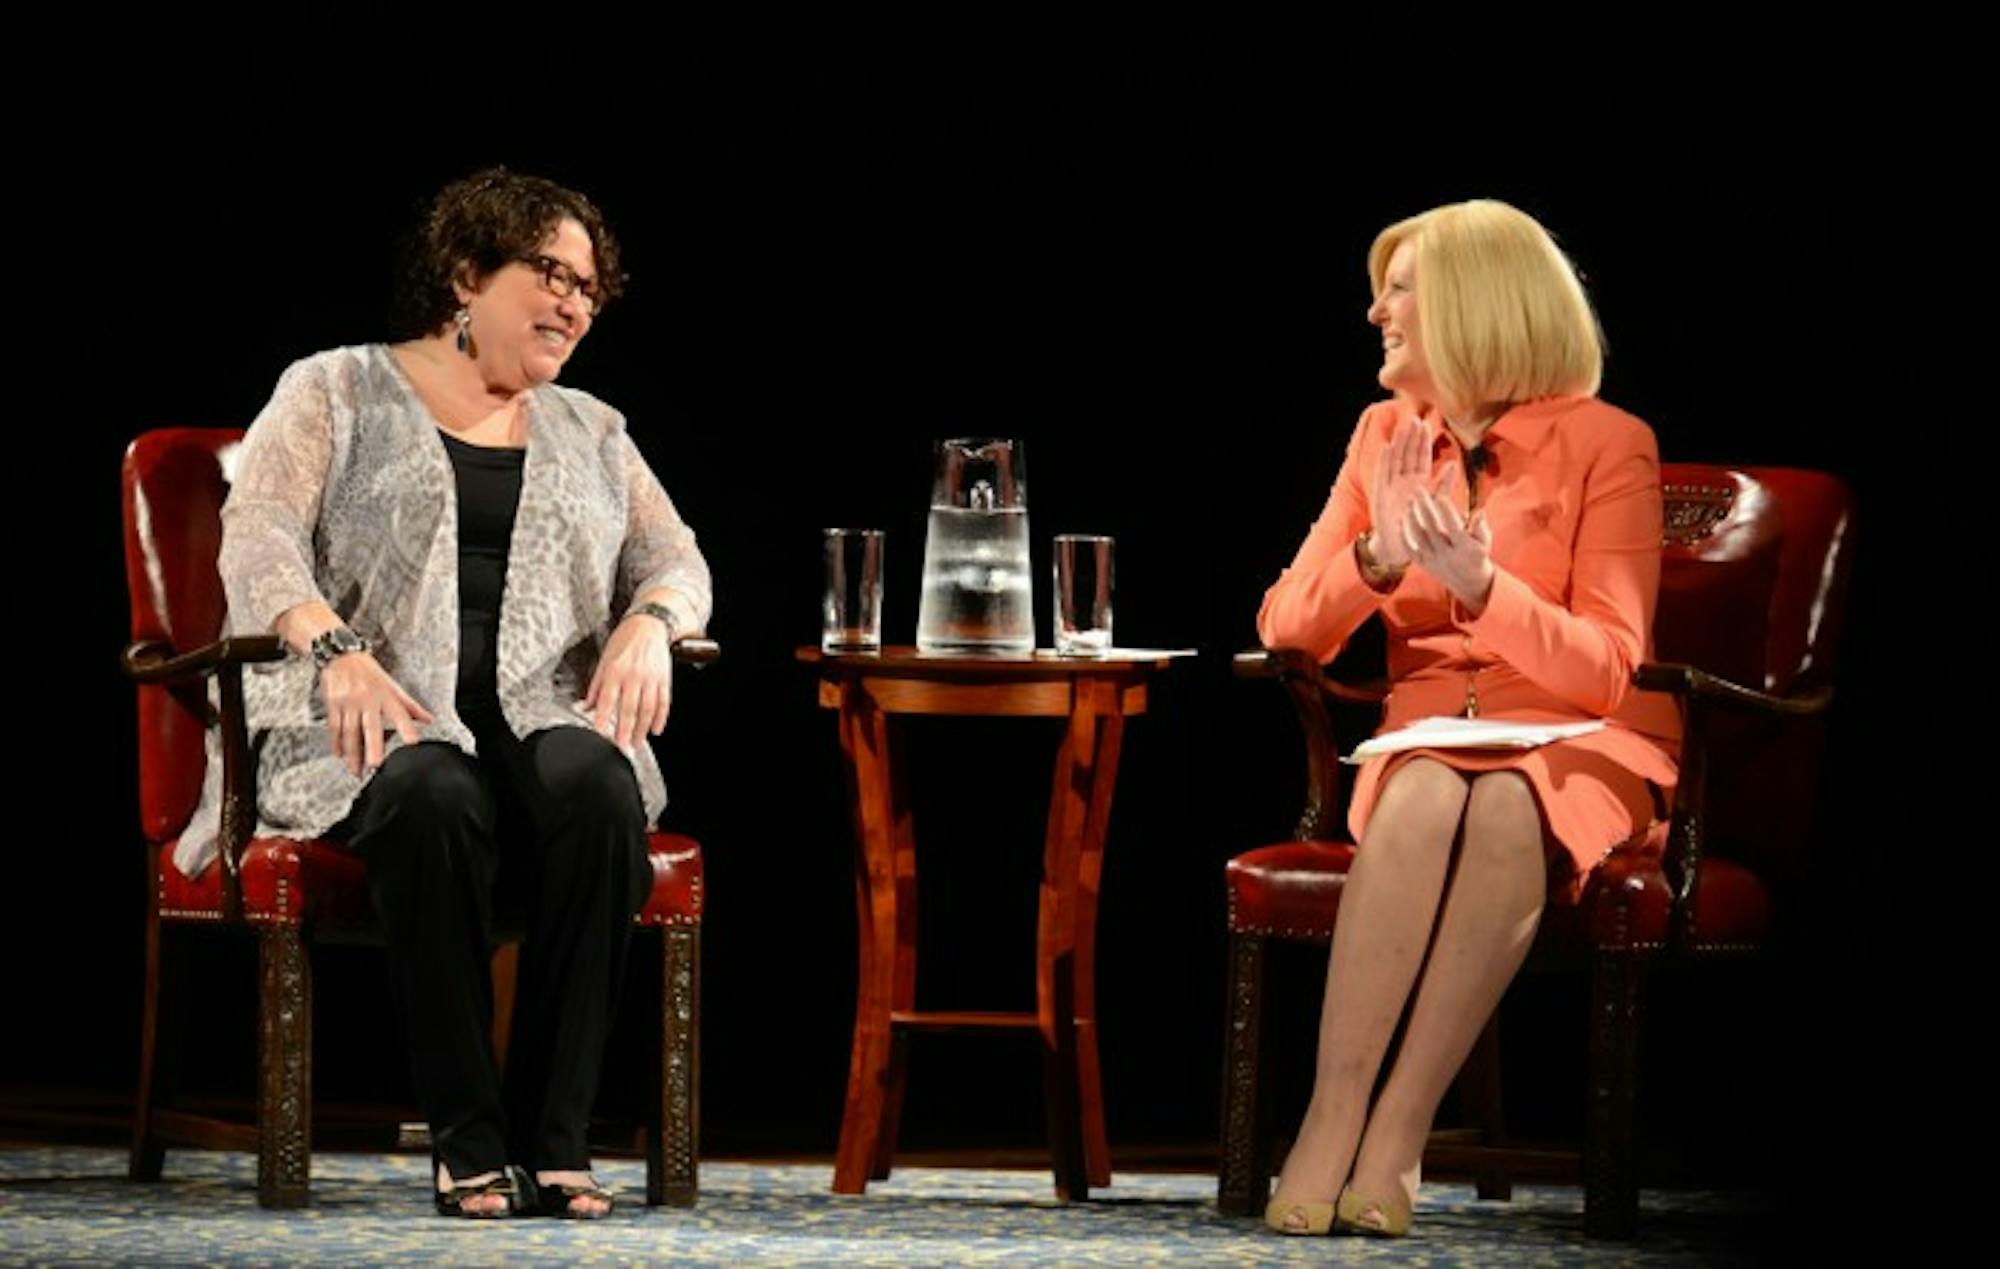 Supreme Court Justice, Sonia Sotomayor, converses with NBC news  correspondent, Anne Thompson, on Wednesday night in the DeBartolo Performing Arts Center.